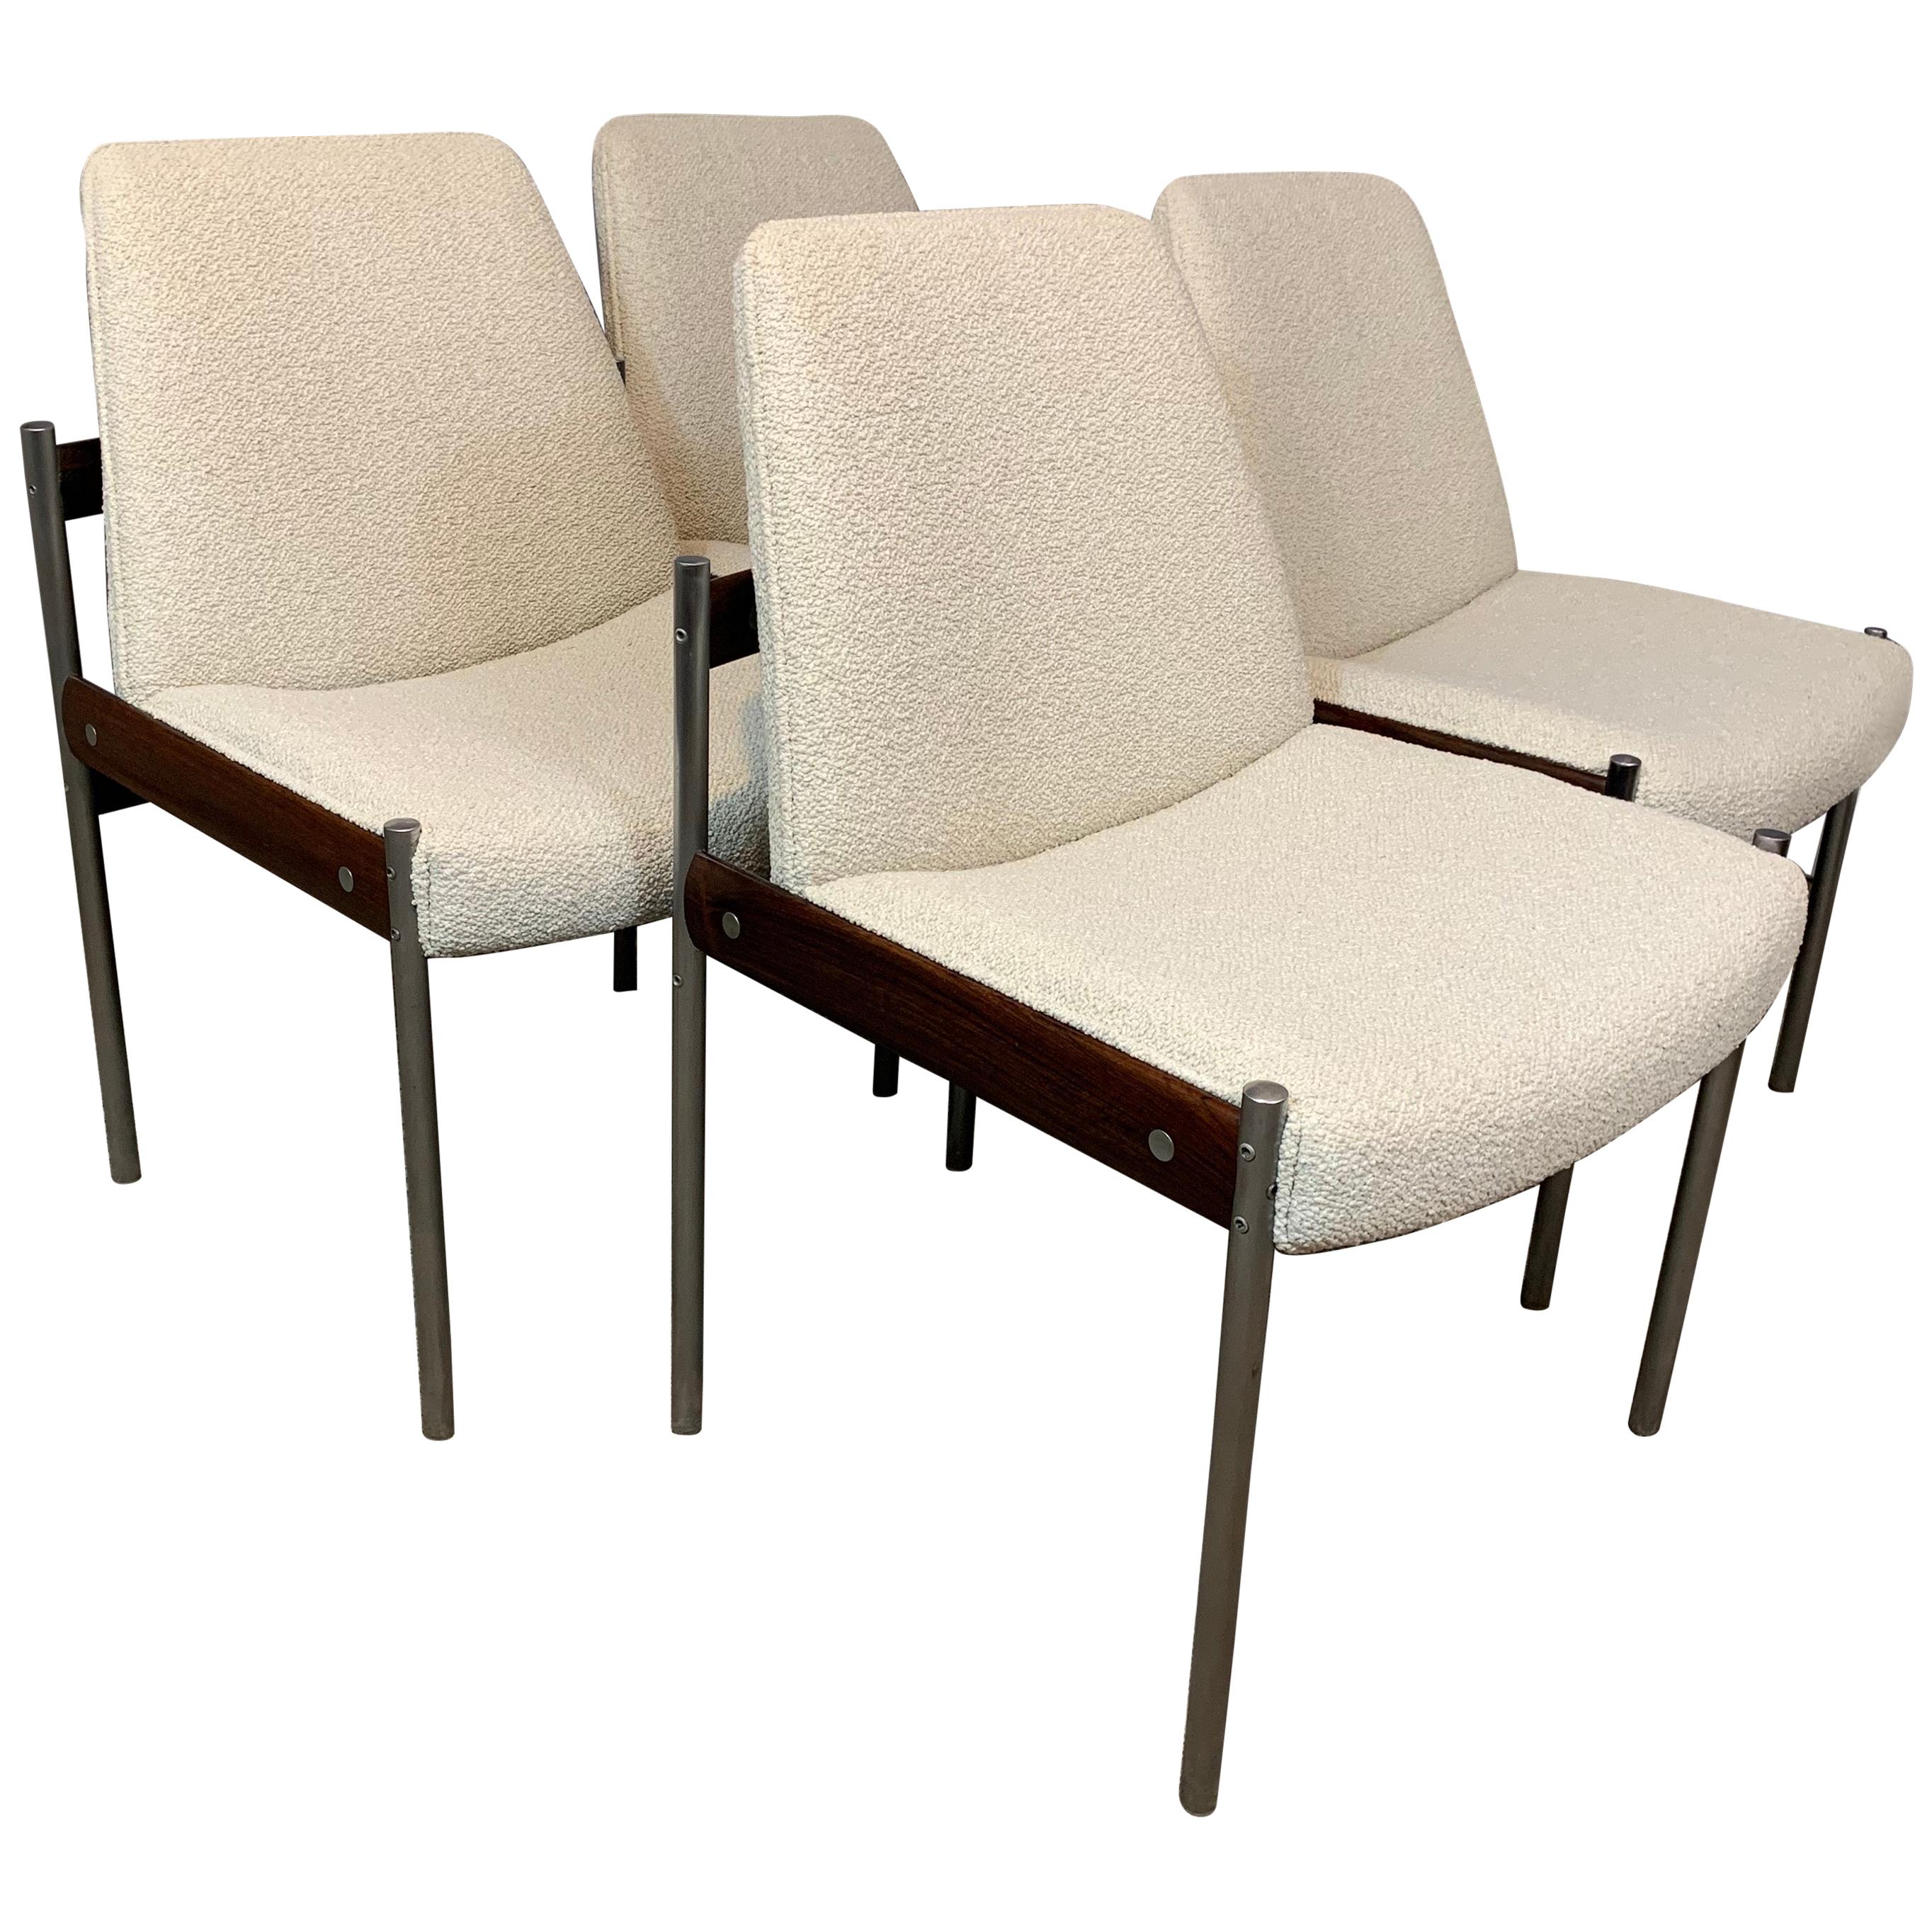 Set of 4 1960s Rosewood Dining Chairs by Sven Ivar Dysthe for Dokka Mobler